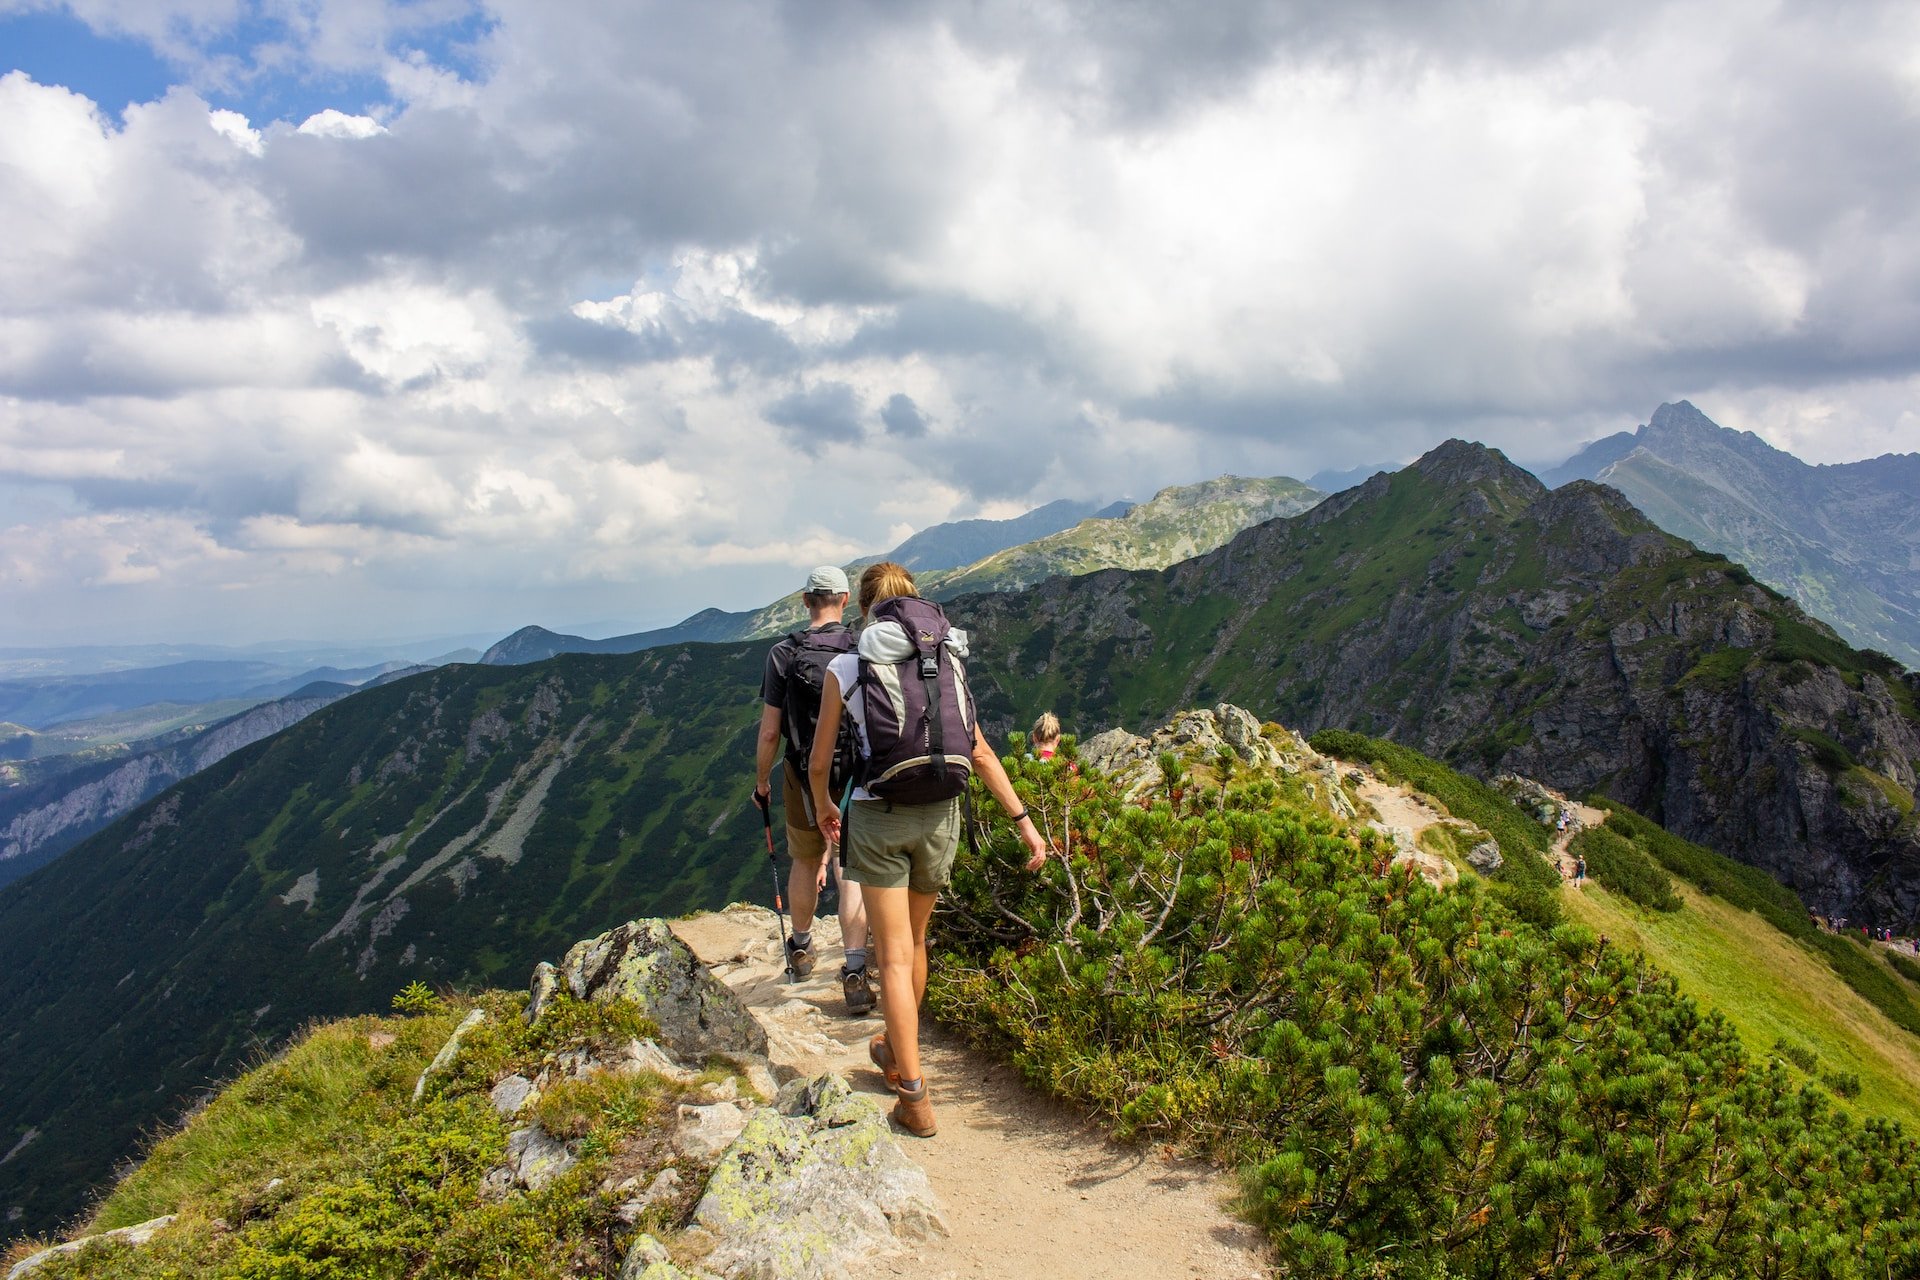 Safety tips for hikers include traveling with a buddy, such as this pair of backpackers in the Tatra Mountains in Europe (photo: Hennadii Hryshyn)